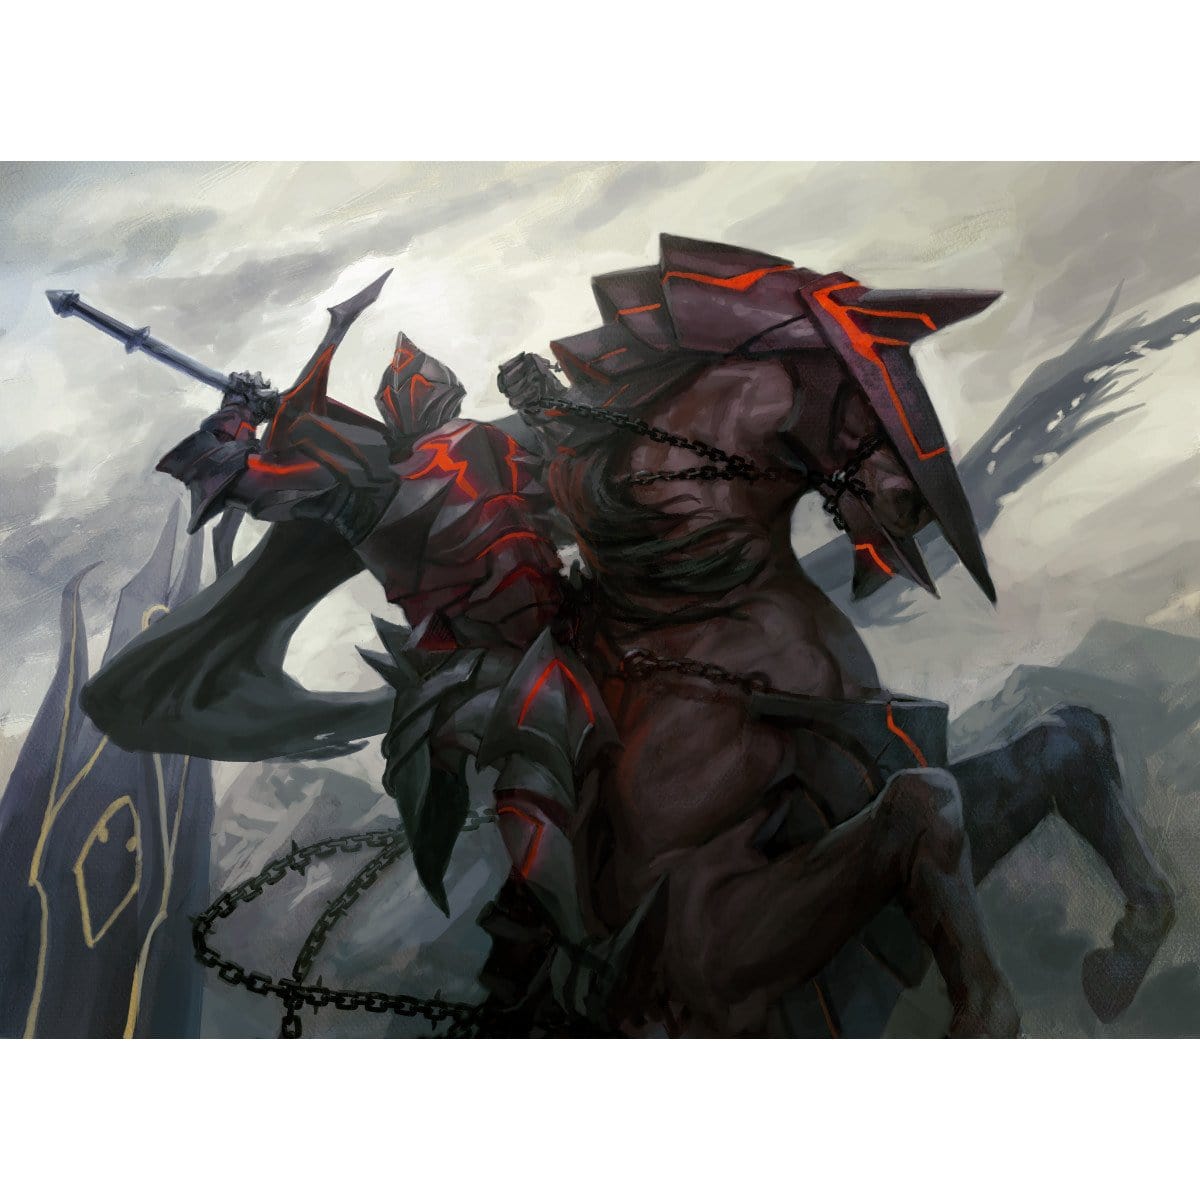 Knight of Infamy Print - Print - Original Magic Art - Accessories for Magic the Gathering and other card games